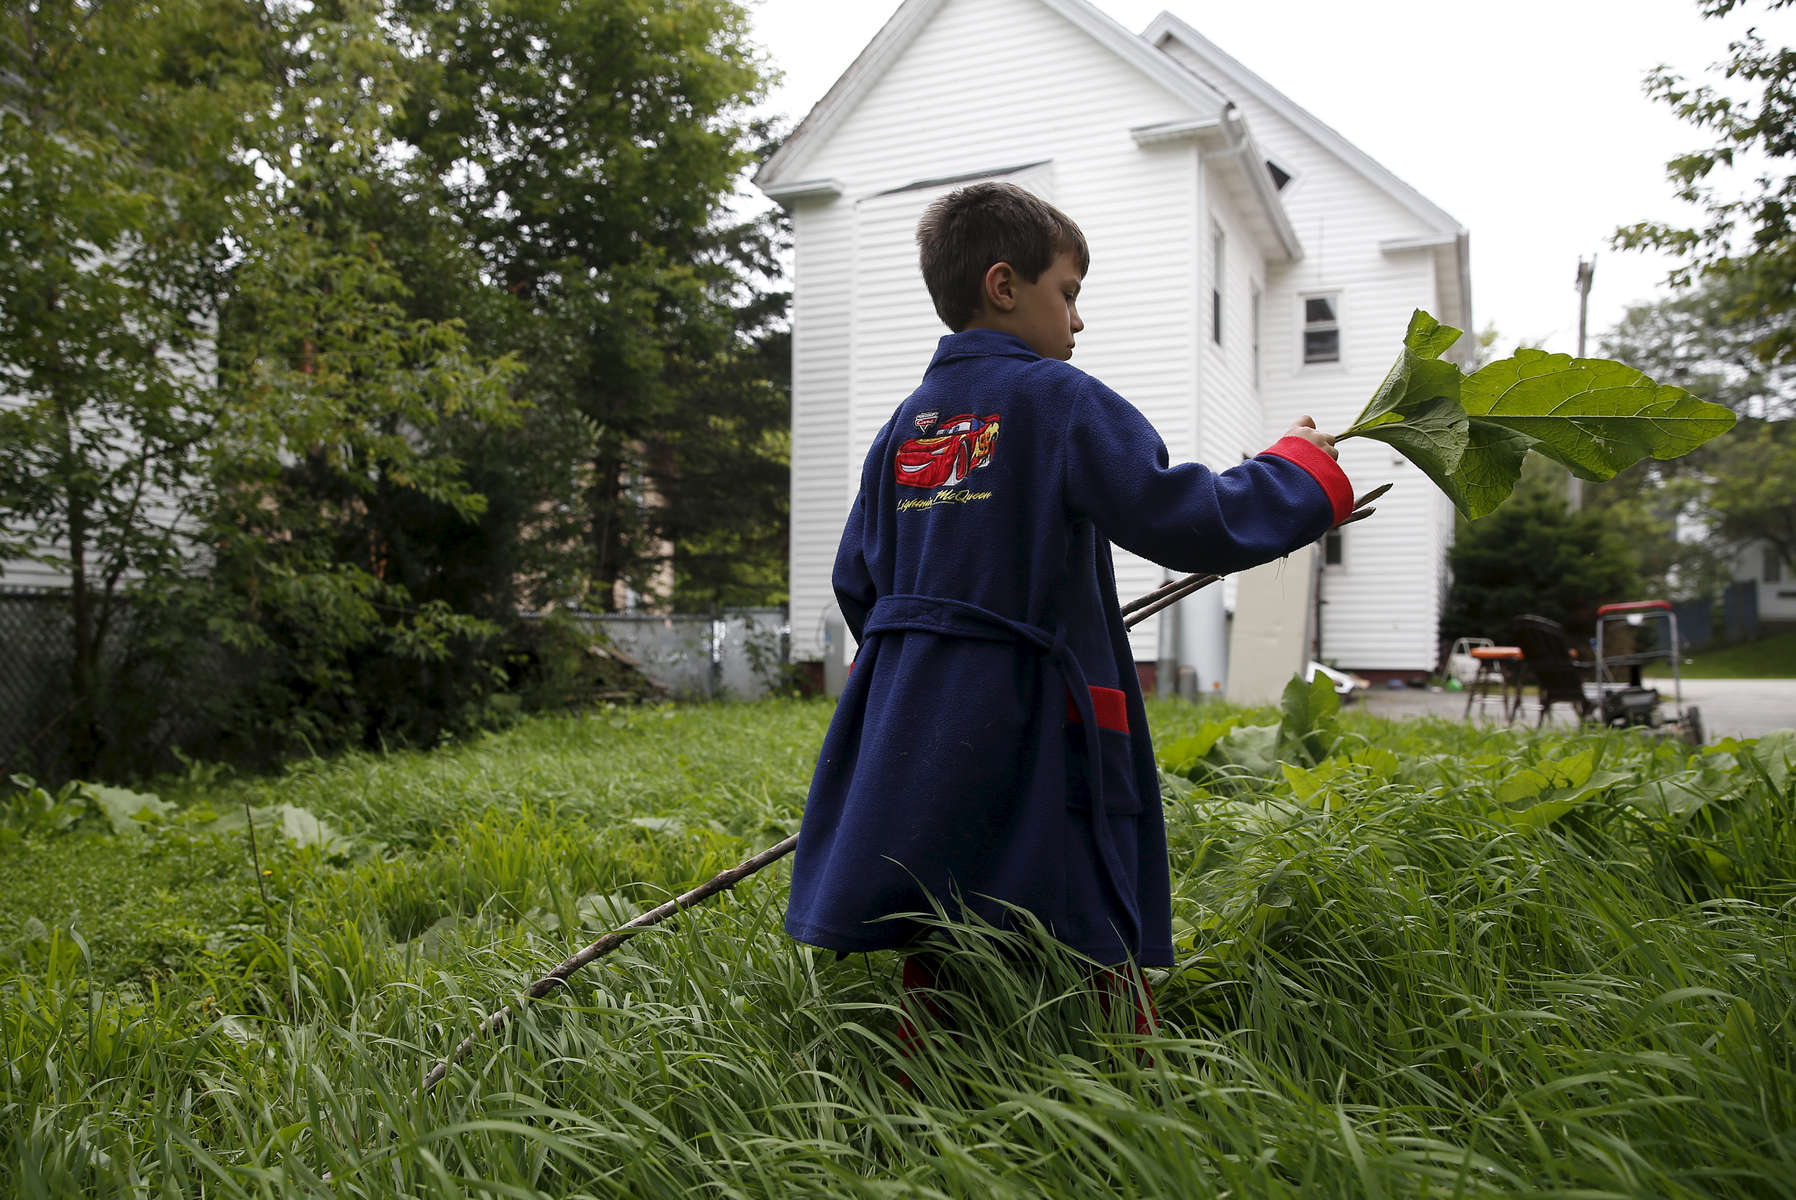 Lisbon, Maine -- 8/11/2015-- After waking up in his new home and pulling on a newly donated bathrobe, Strider affixed a giant leaf to the end of a stick and played in the backyard. Jessica Rinaldi/Globe Staff